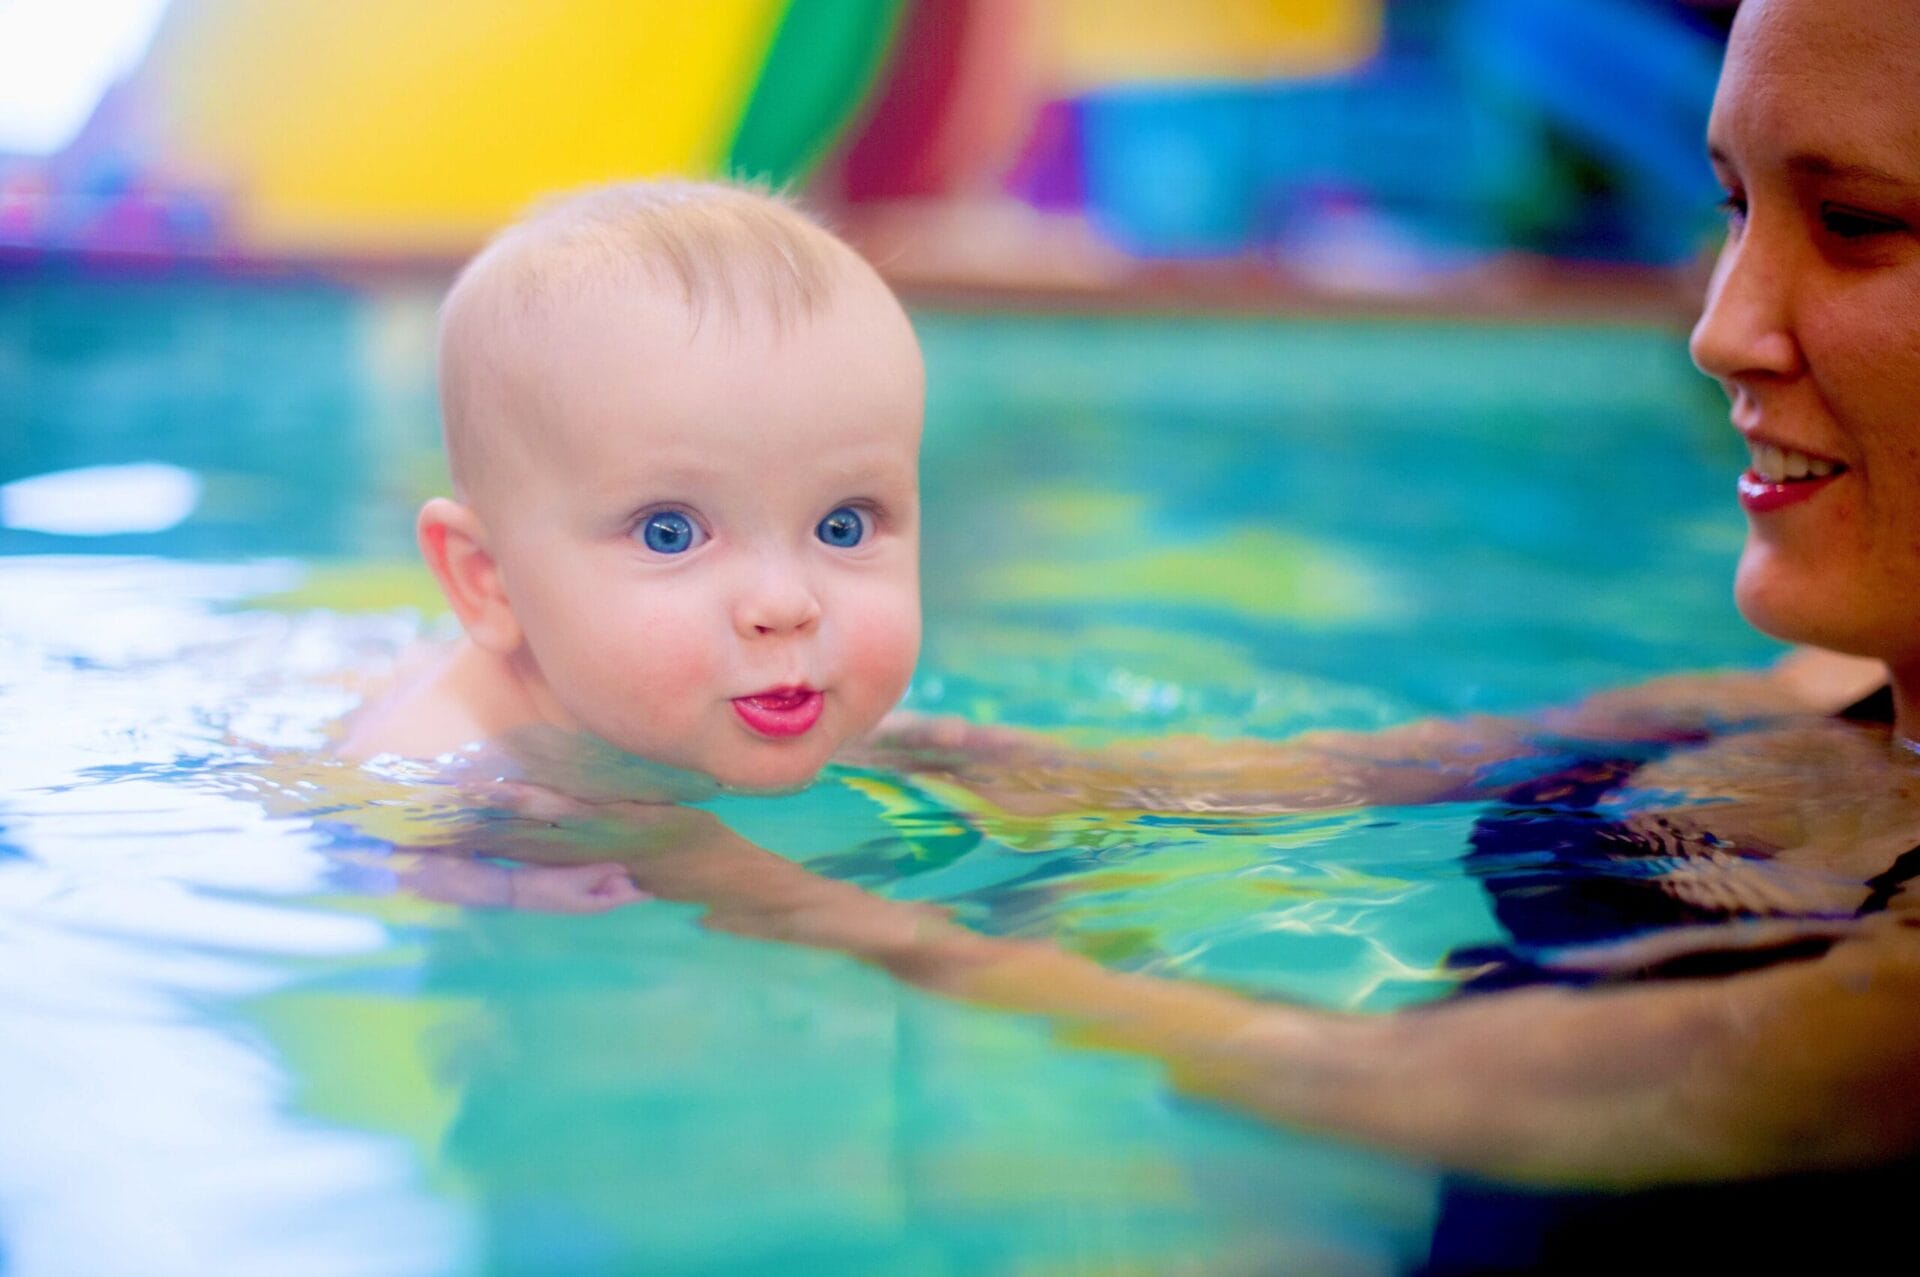 Blue-eyed baby being held at arms length learning to swim with instructor